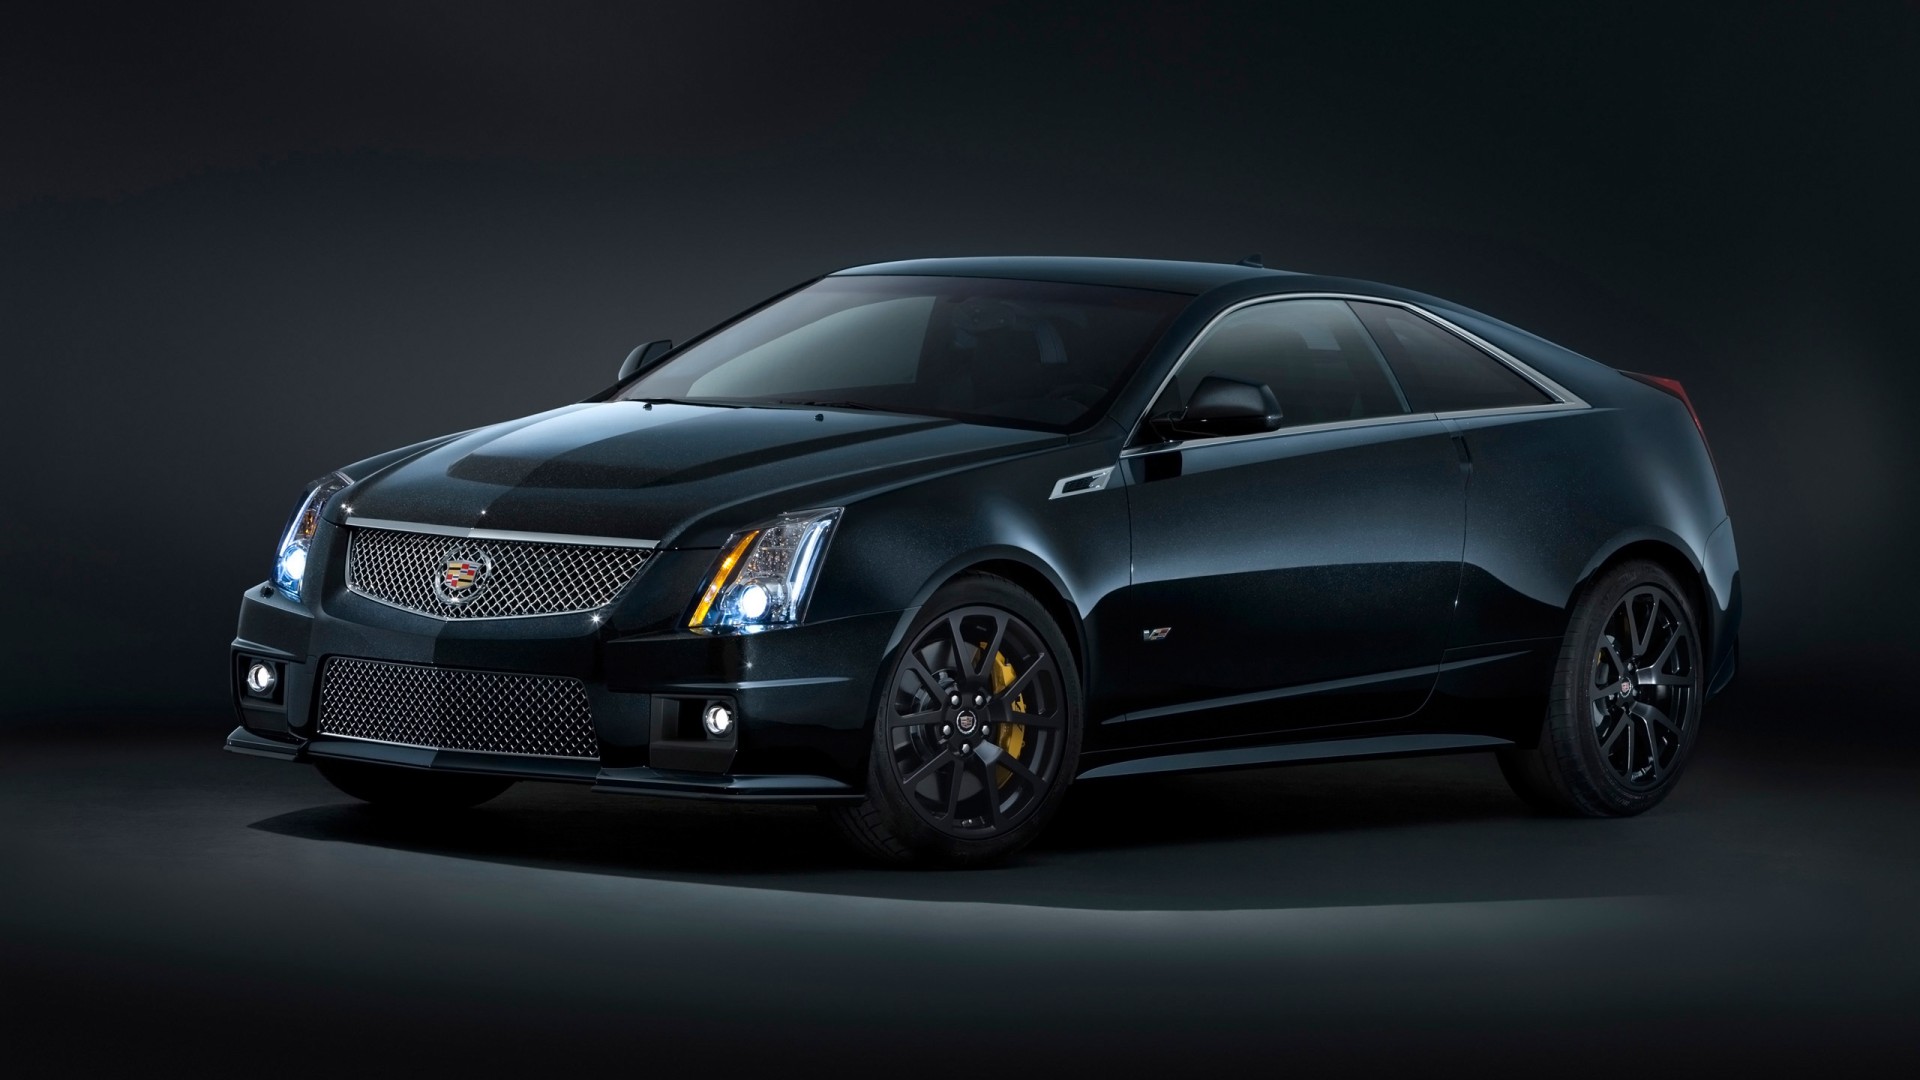 2014 Cadillac CTS V Coupe Wallpaper | HD Car Wallpapers | ID #3750